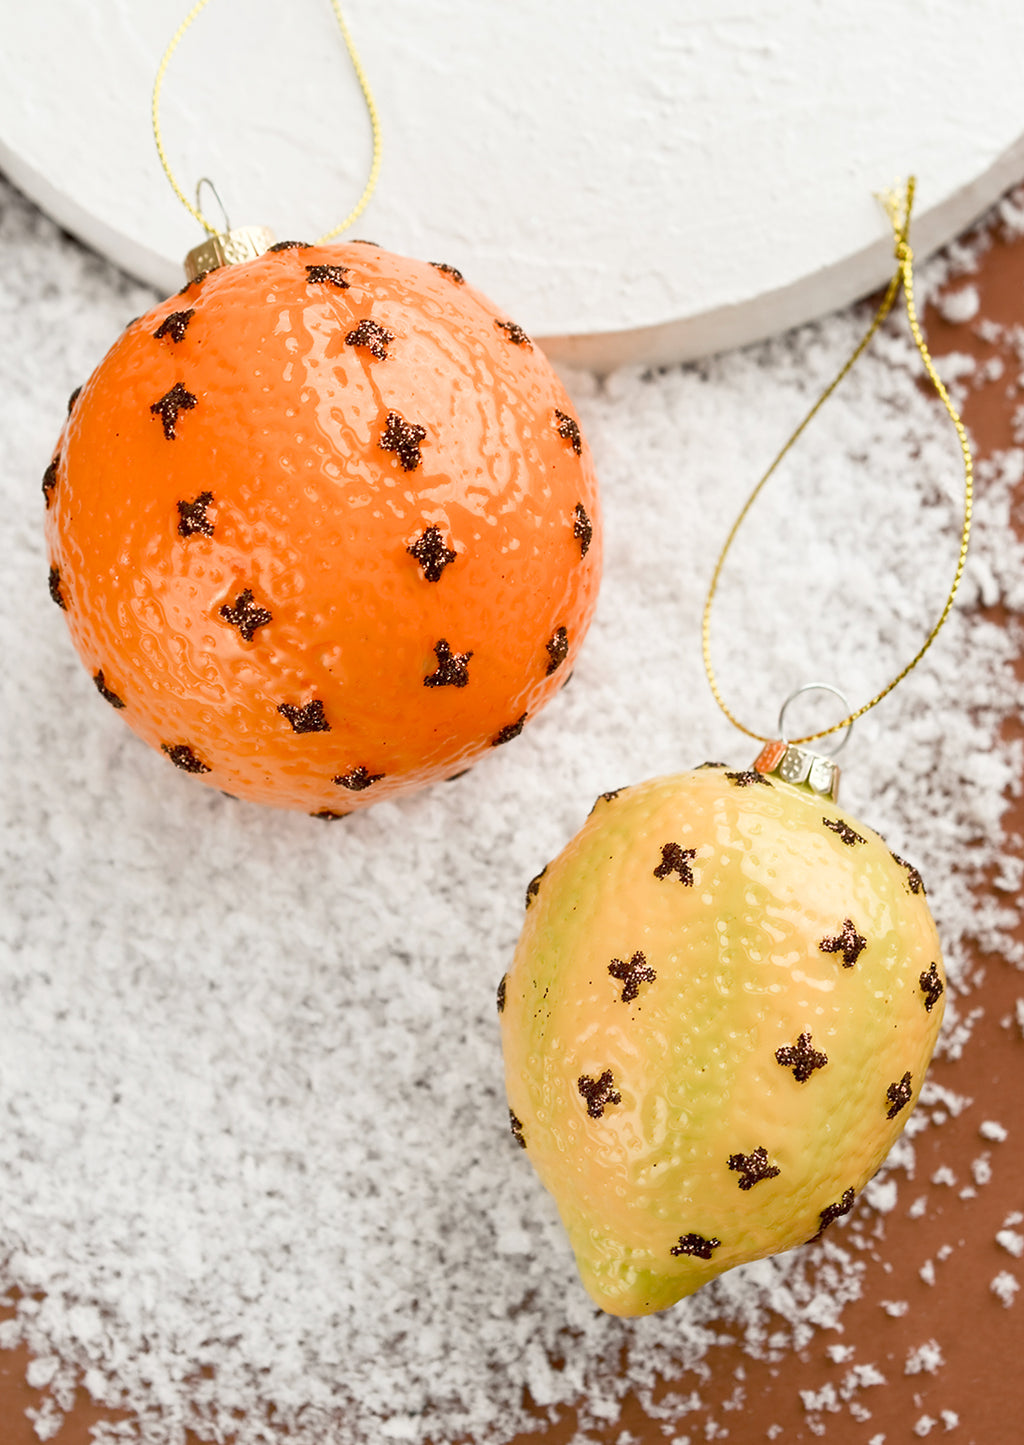 3: Glass ornaments of clove spiked lemon and orange.